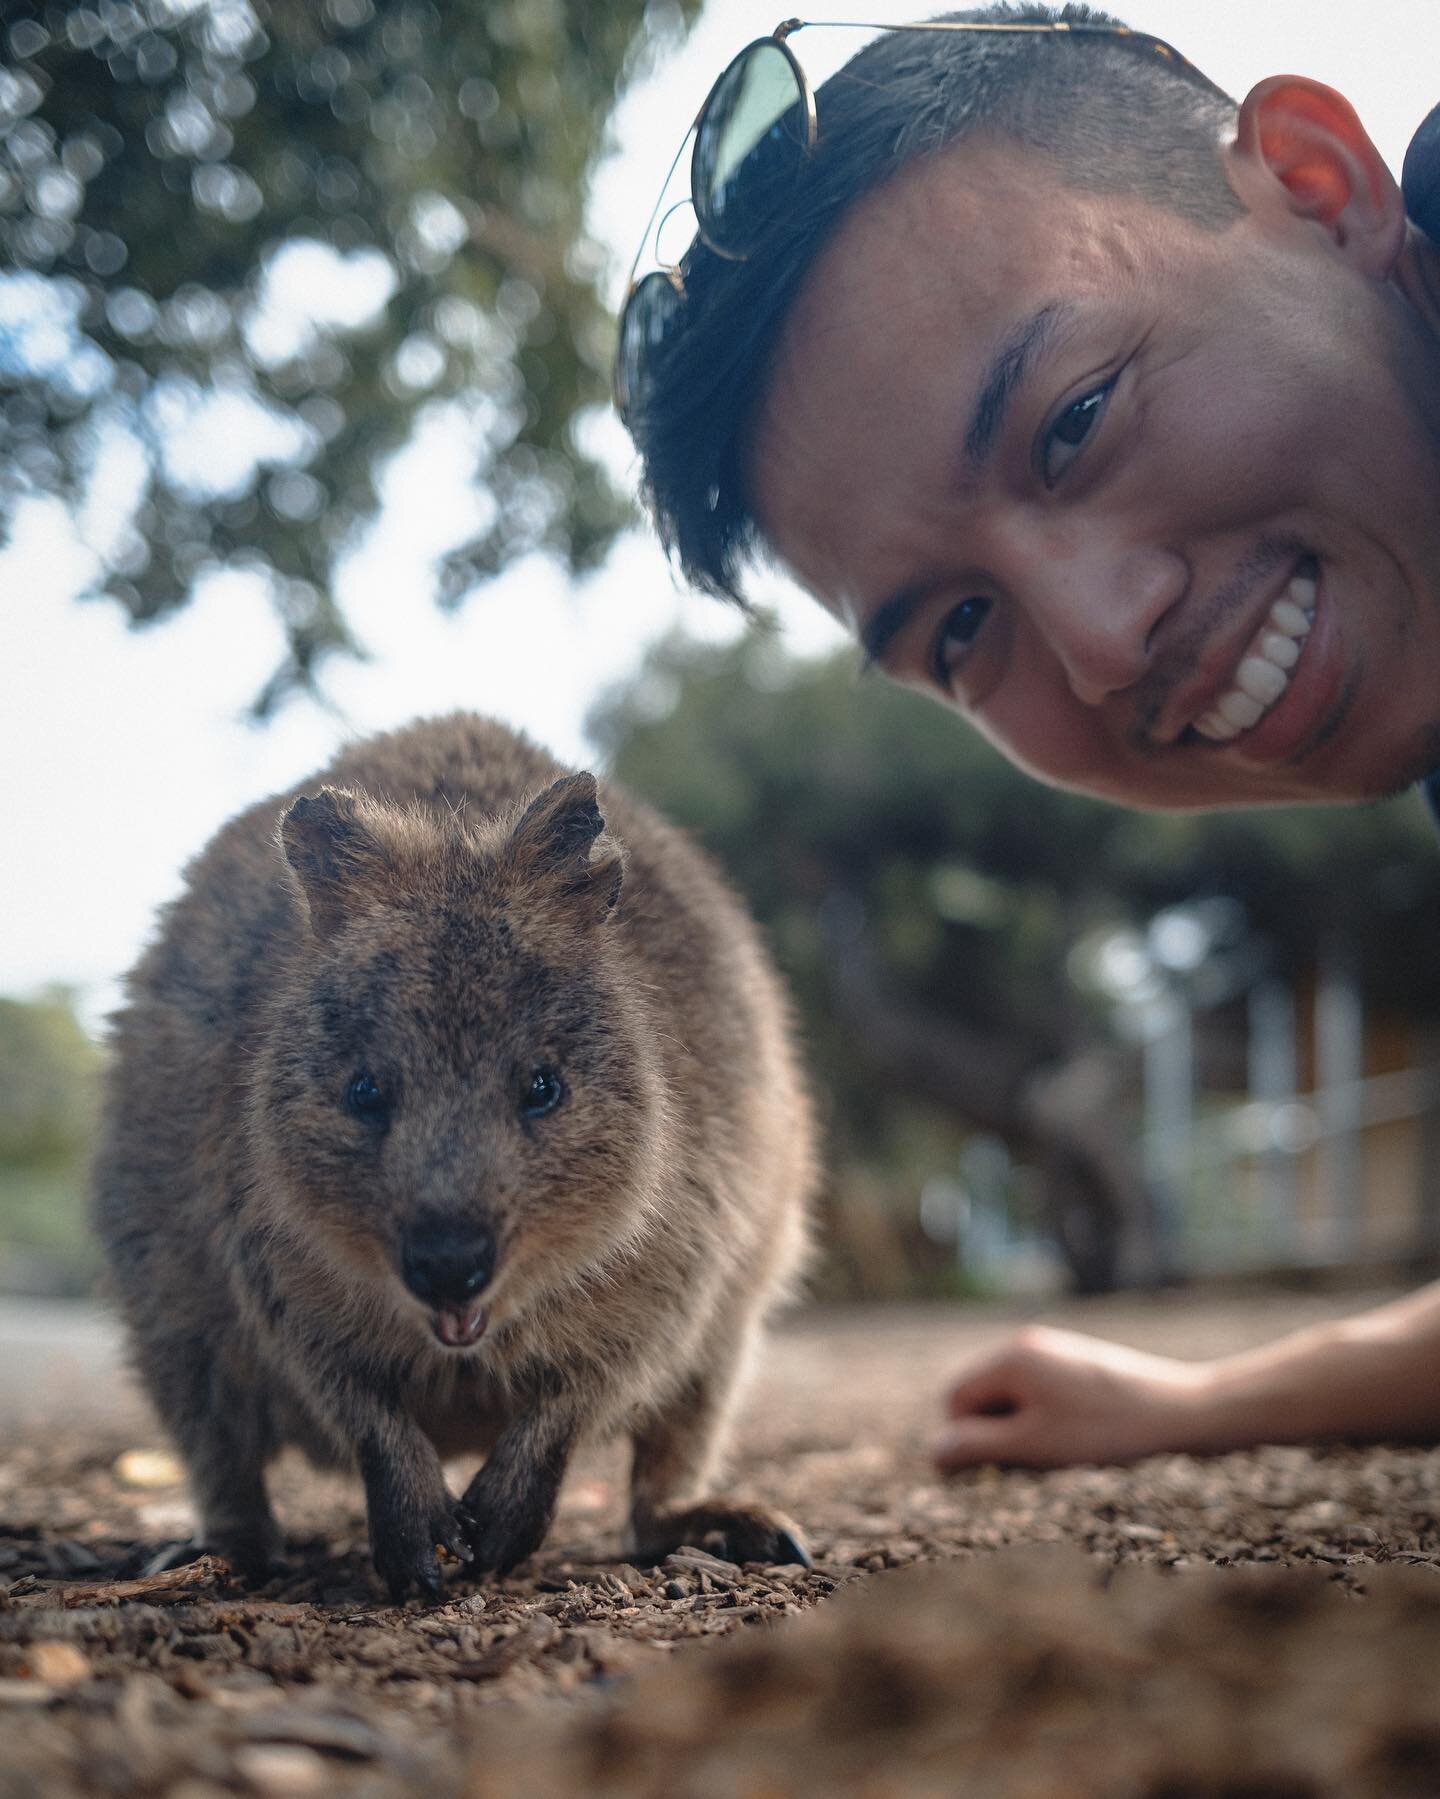 Half of my Quokka photos were out of focus 🫠
Anywho, they were cute as advertised :)
#rottnestisland #rottnestislandwa #discoveraustralia #canonaustralia #perthlife #perthtodo #quokkaselfies #quokkas